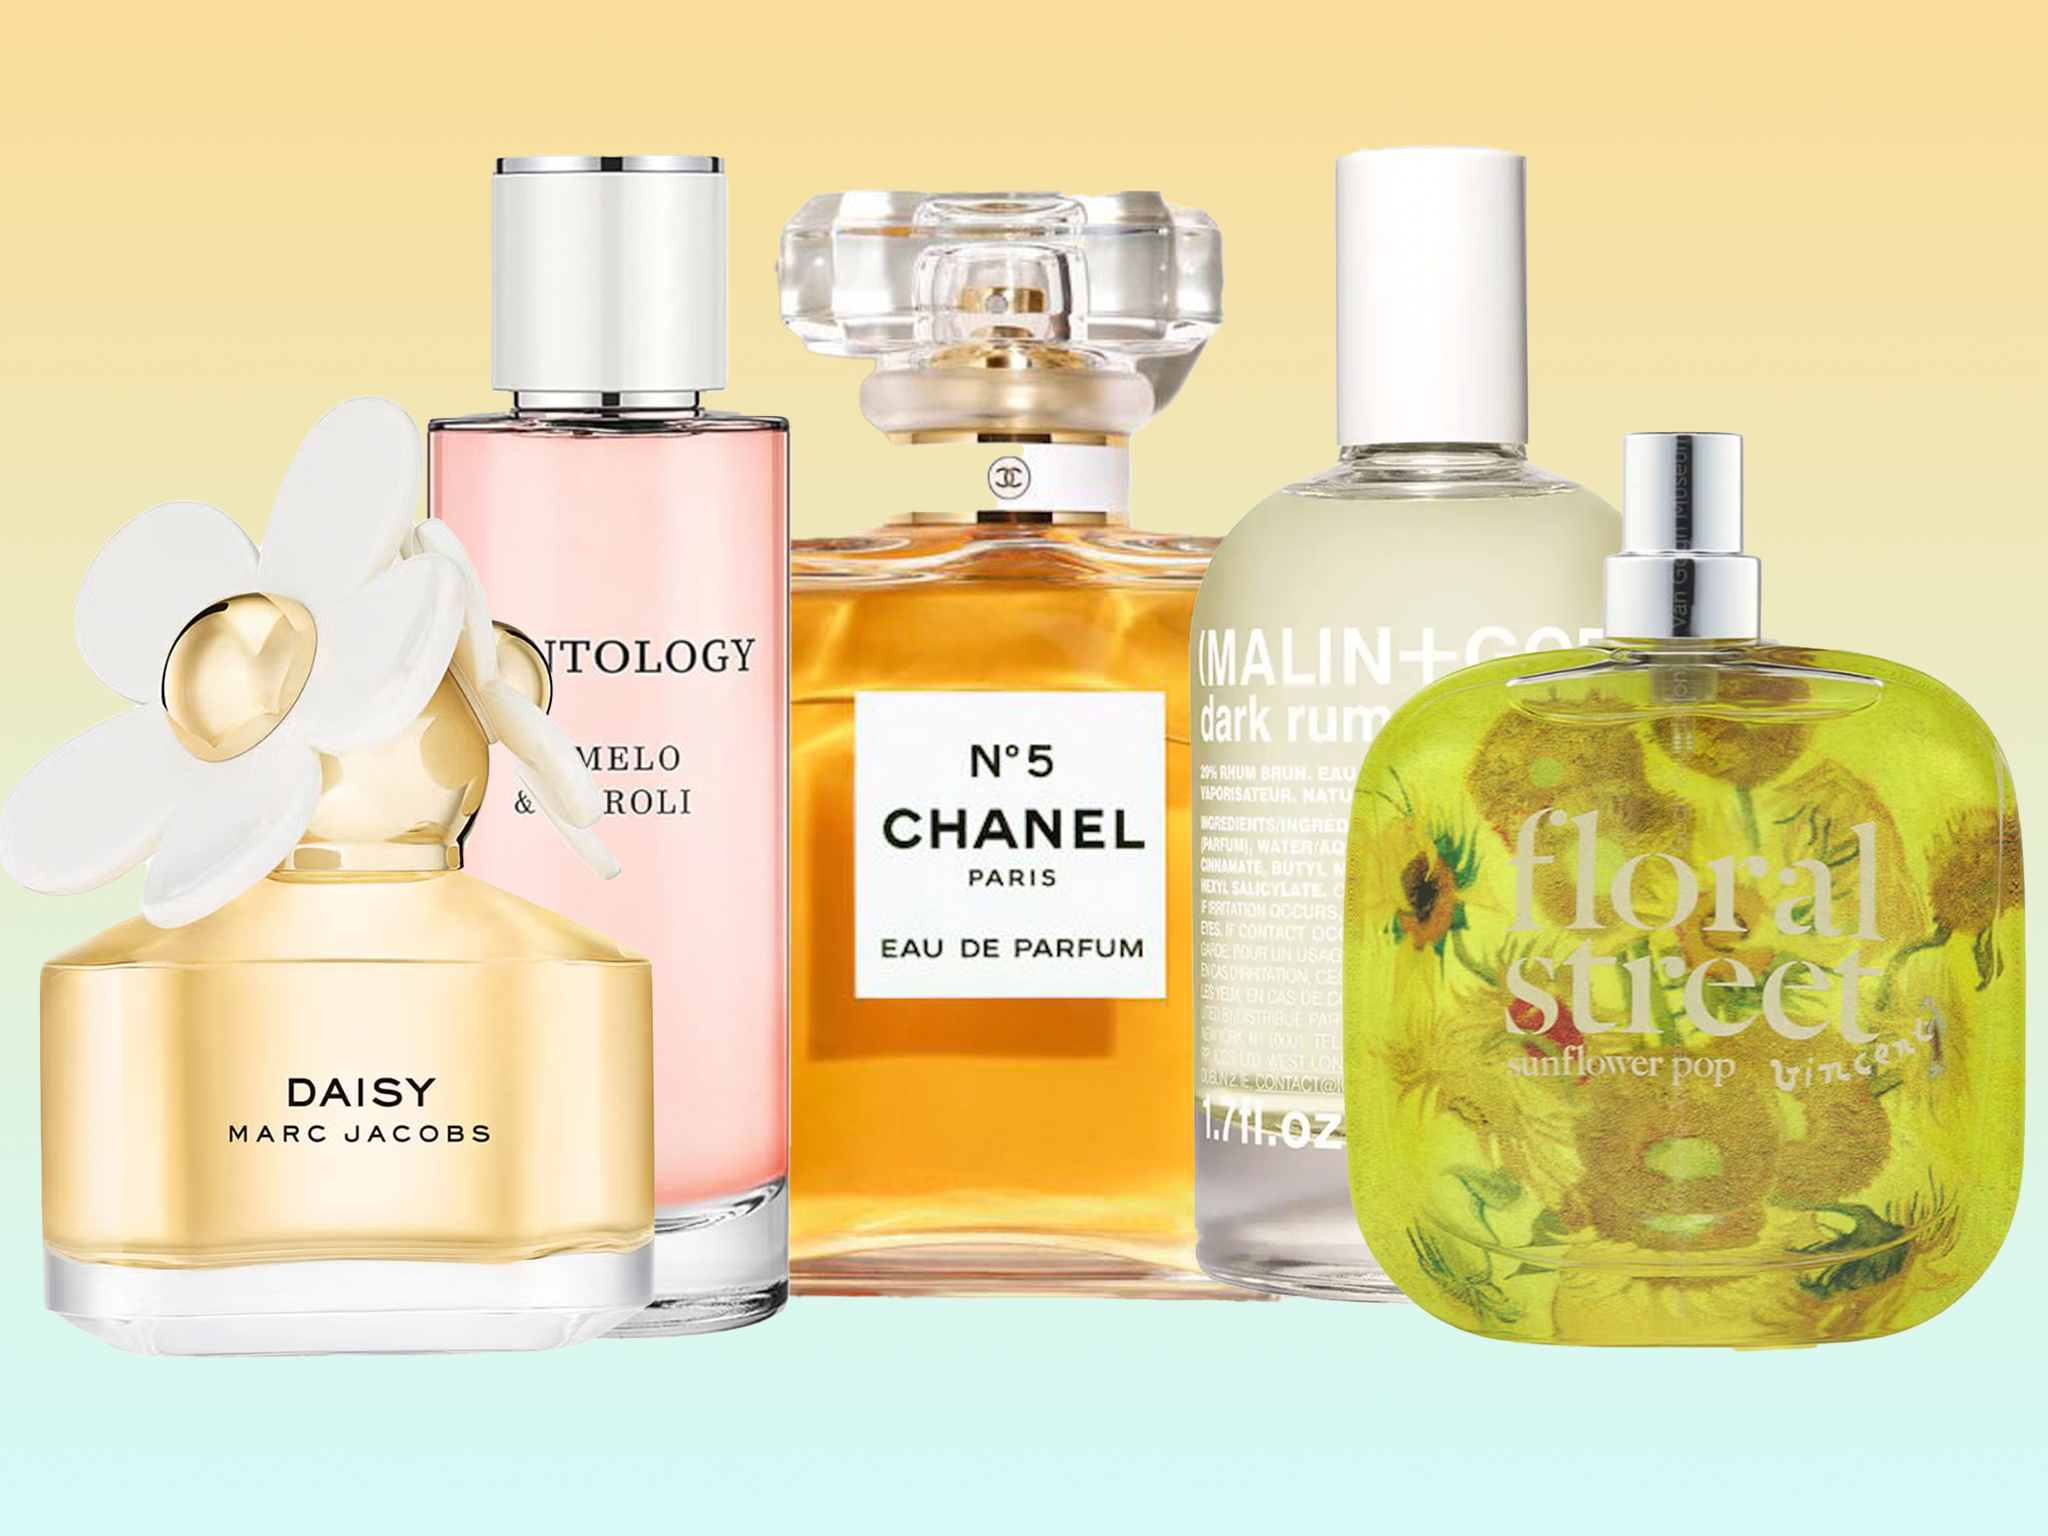 10 best perfumes for women, from floral to woody scents